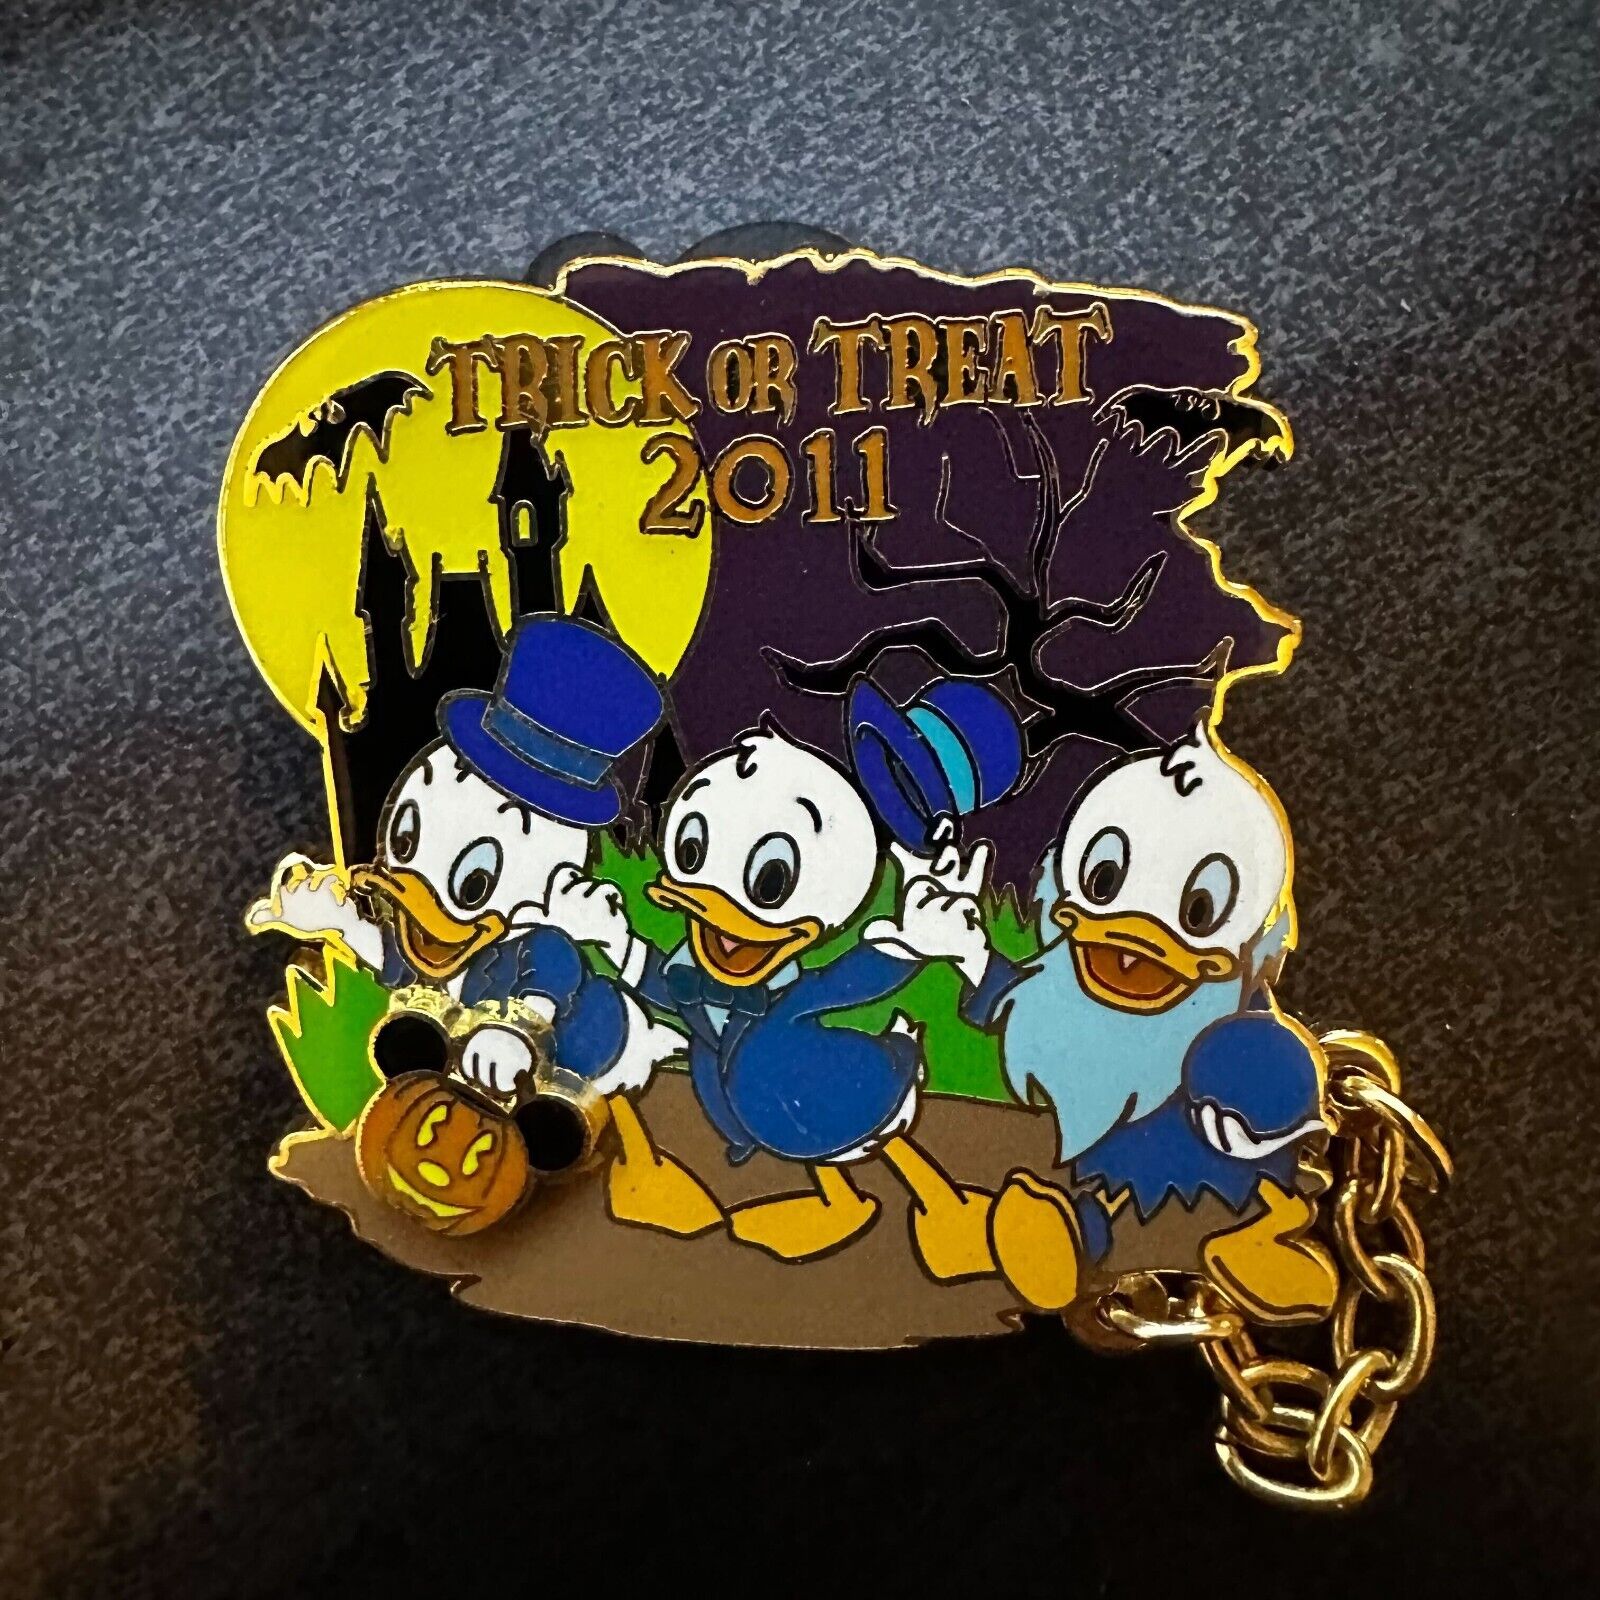 PP85909     Trick or Treat 2011 - Huey, Dewey, and Louie as Hitchhiking Ghosts